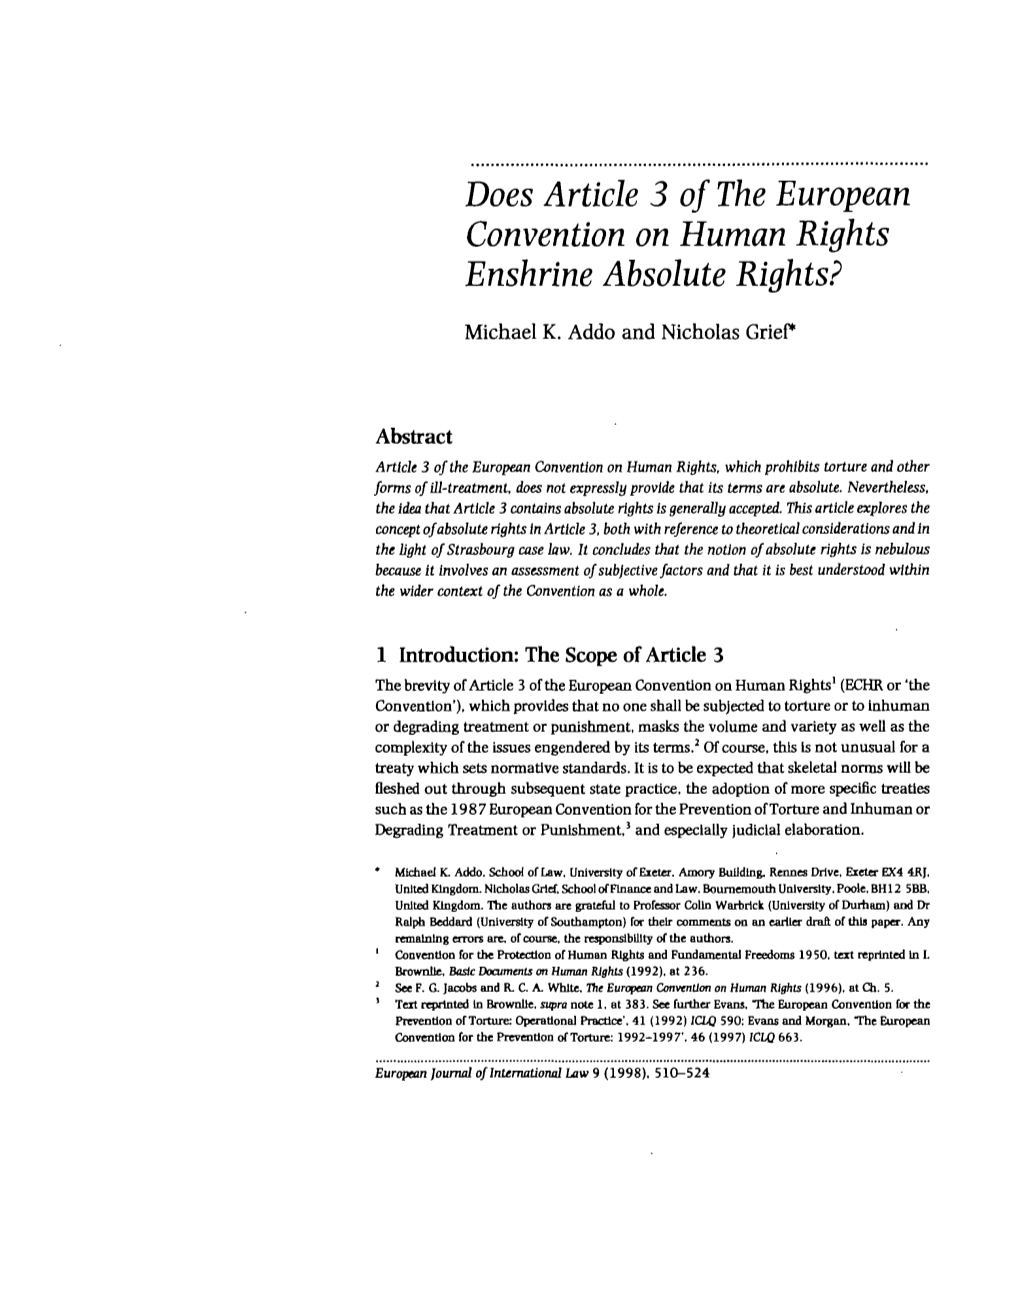 Does Article 3 of the European Convention on Human Rights Enshrine Absolute Rights?